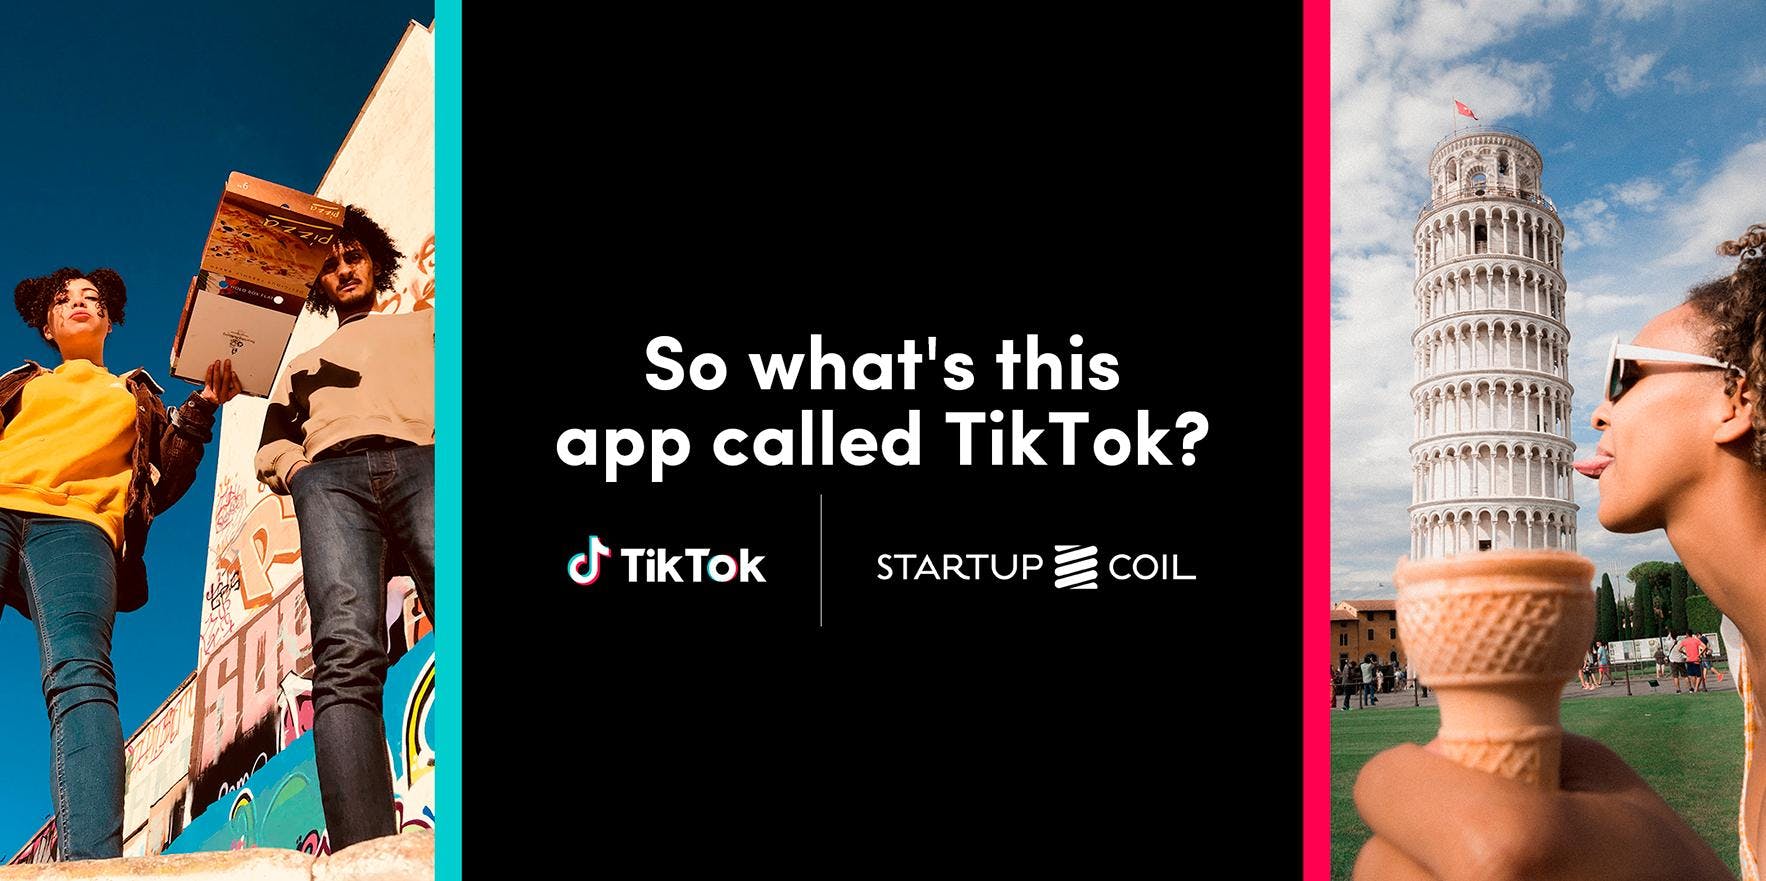 So what's this app called TikTok?